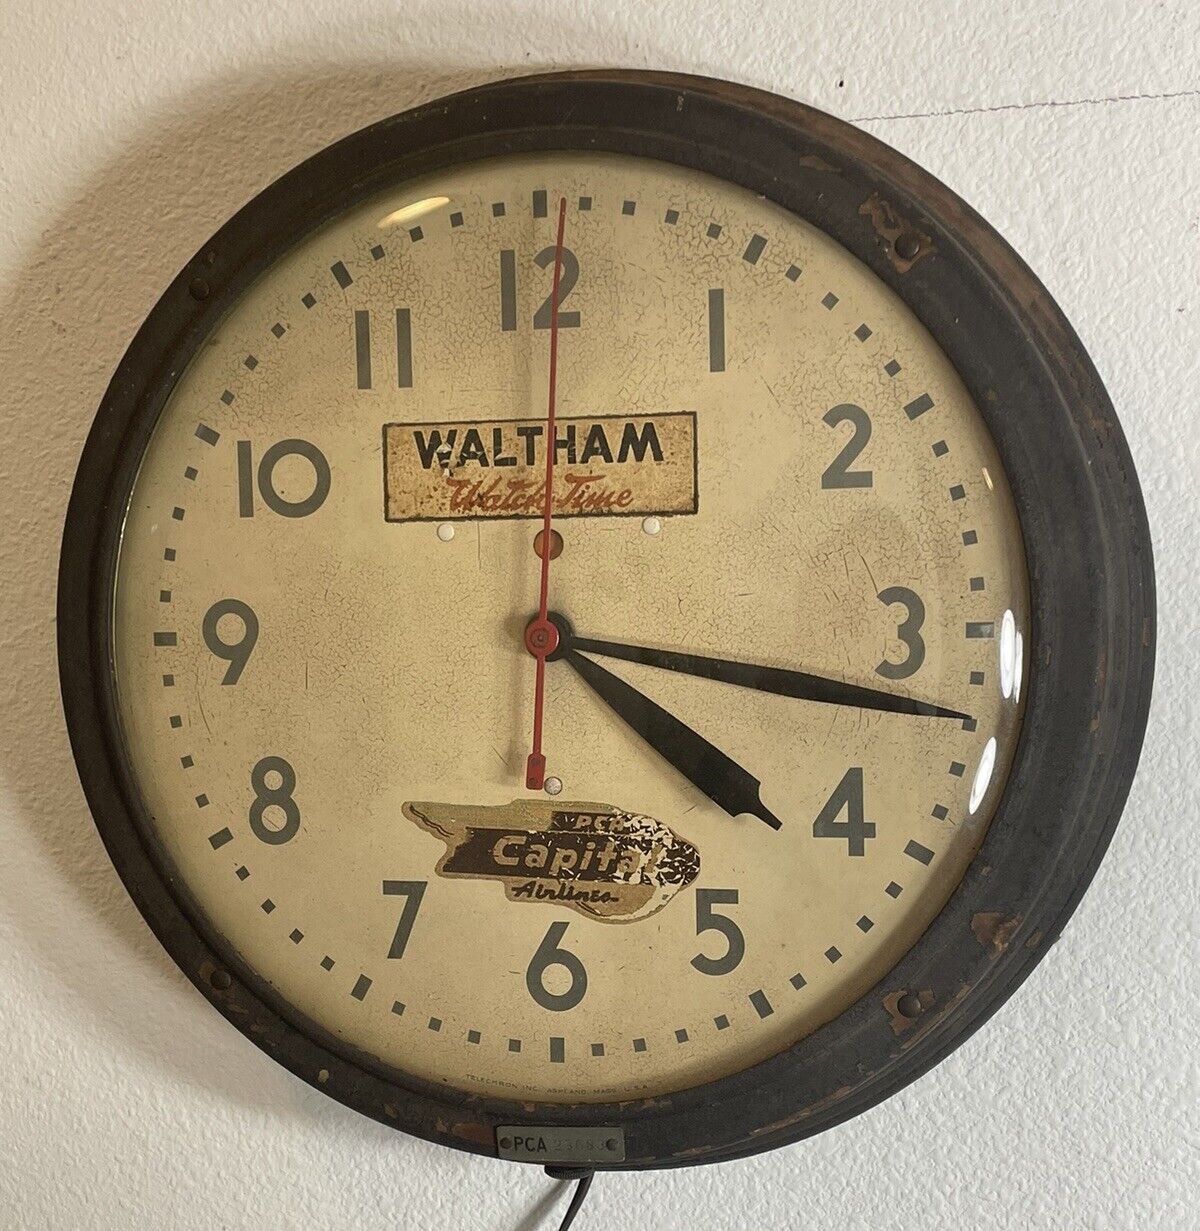 1940’s-50’s Telechrom Commercial 14” Wall Clock - Waltham PCA Capital Airlines